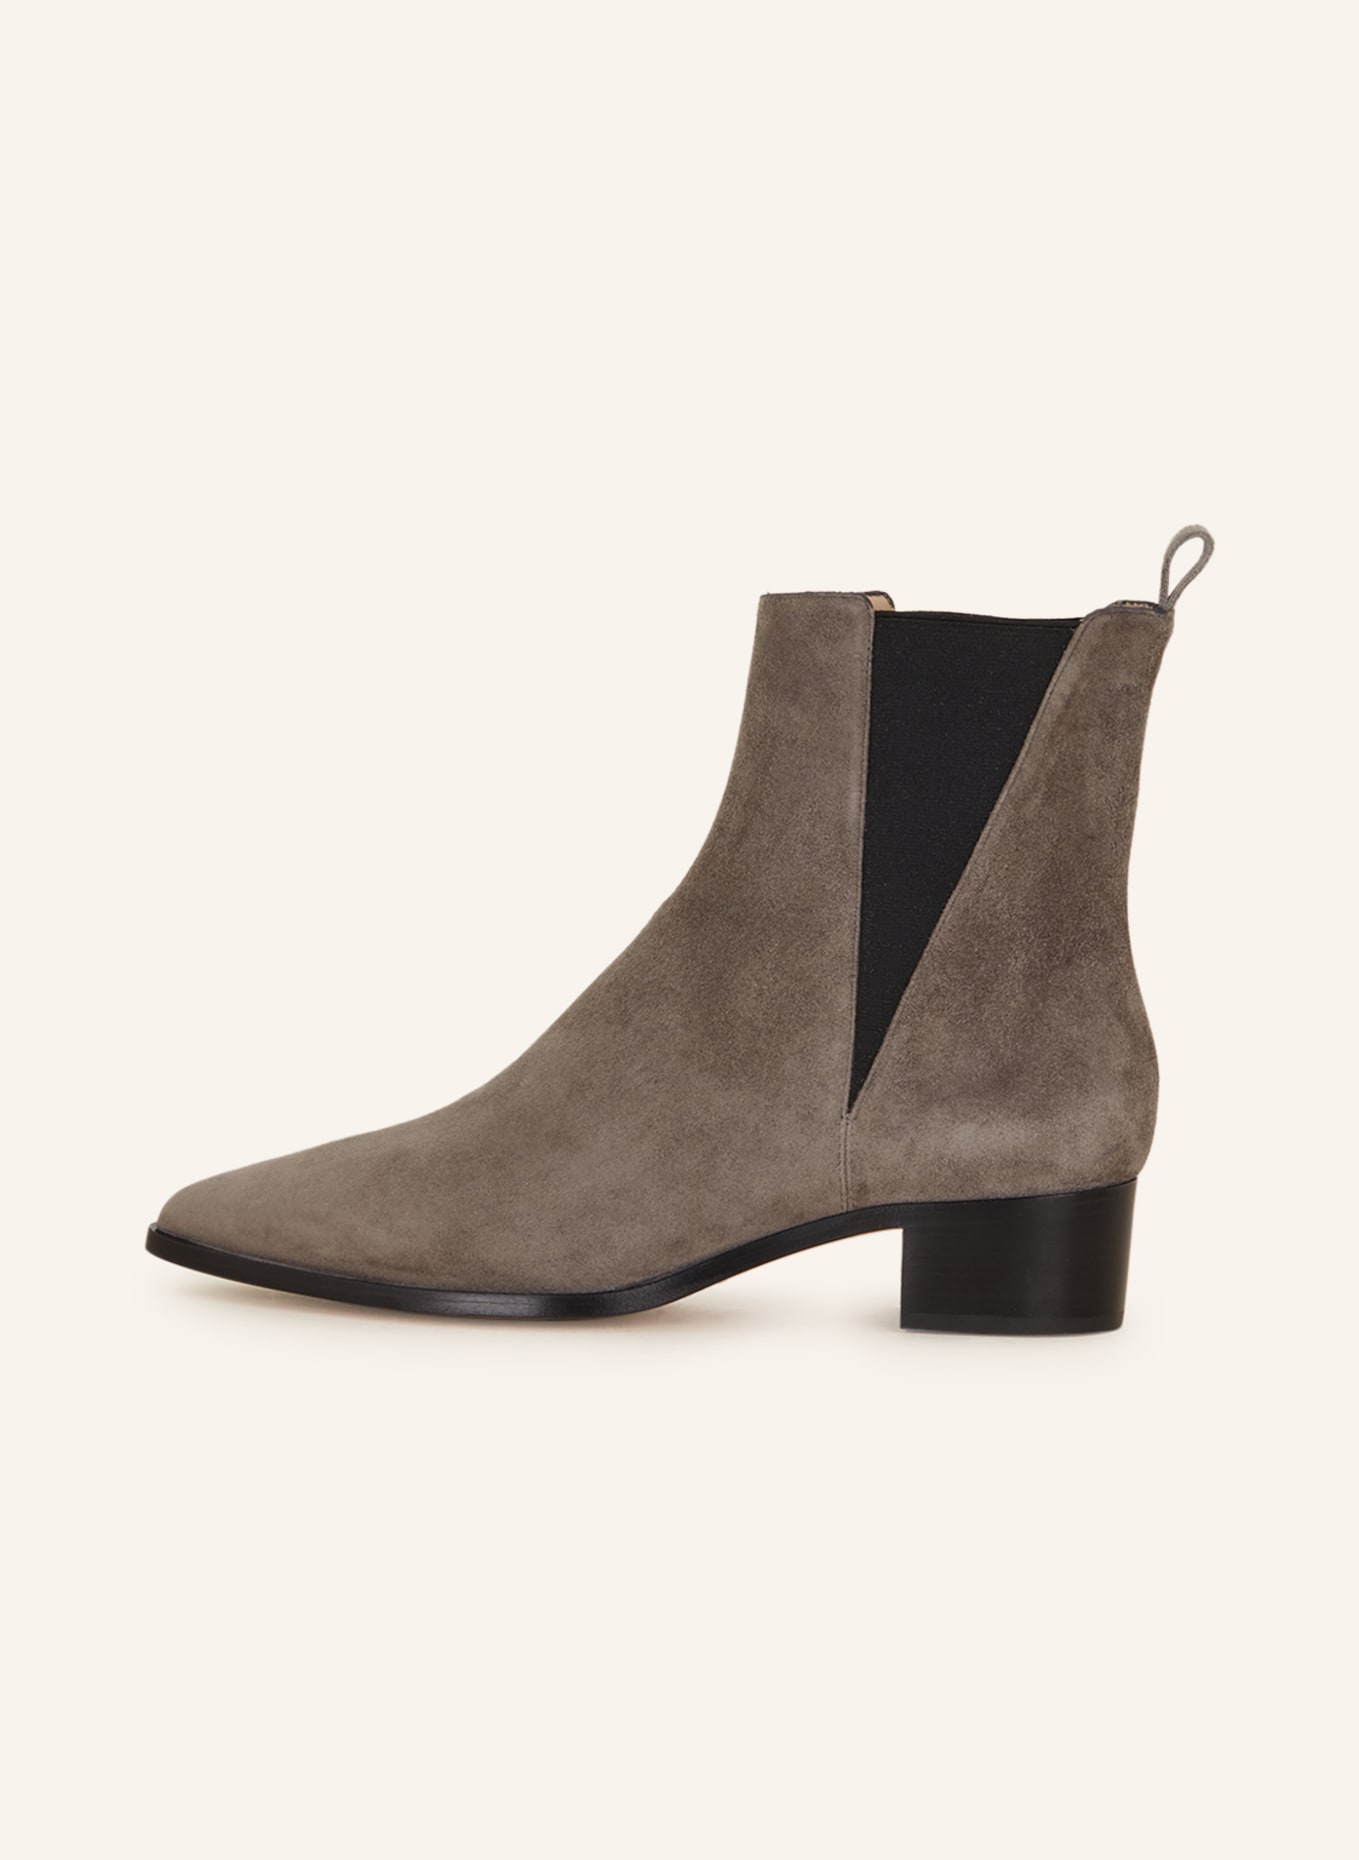 POMME D'OR Chelsea-Boots SIBYL, Farbe: TAUPE/ SCHWARZ (Bild 4)